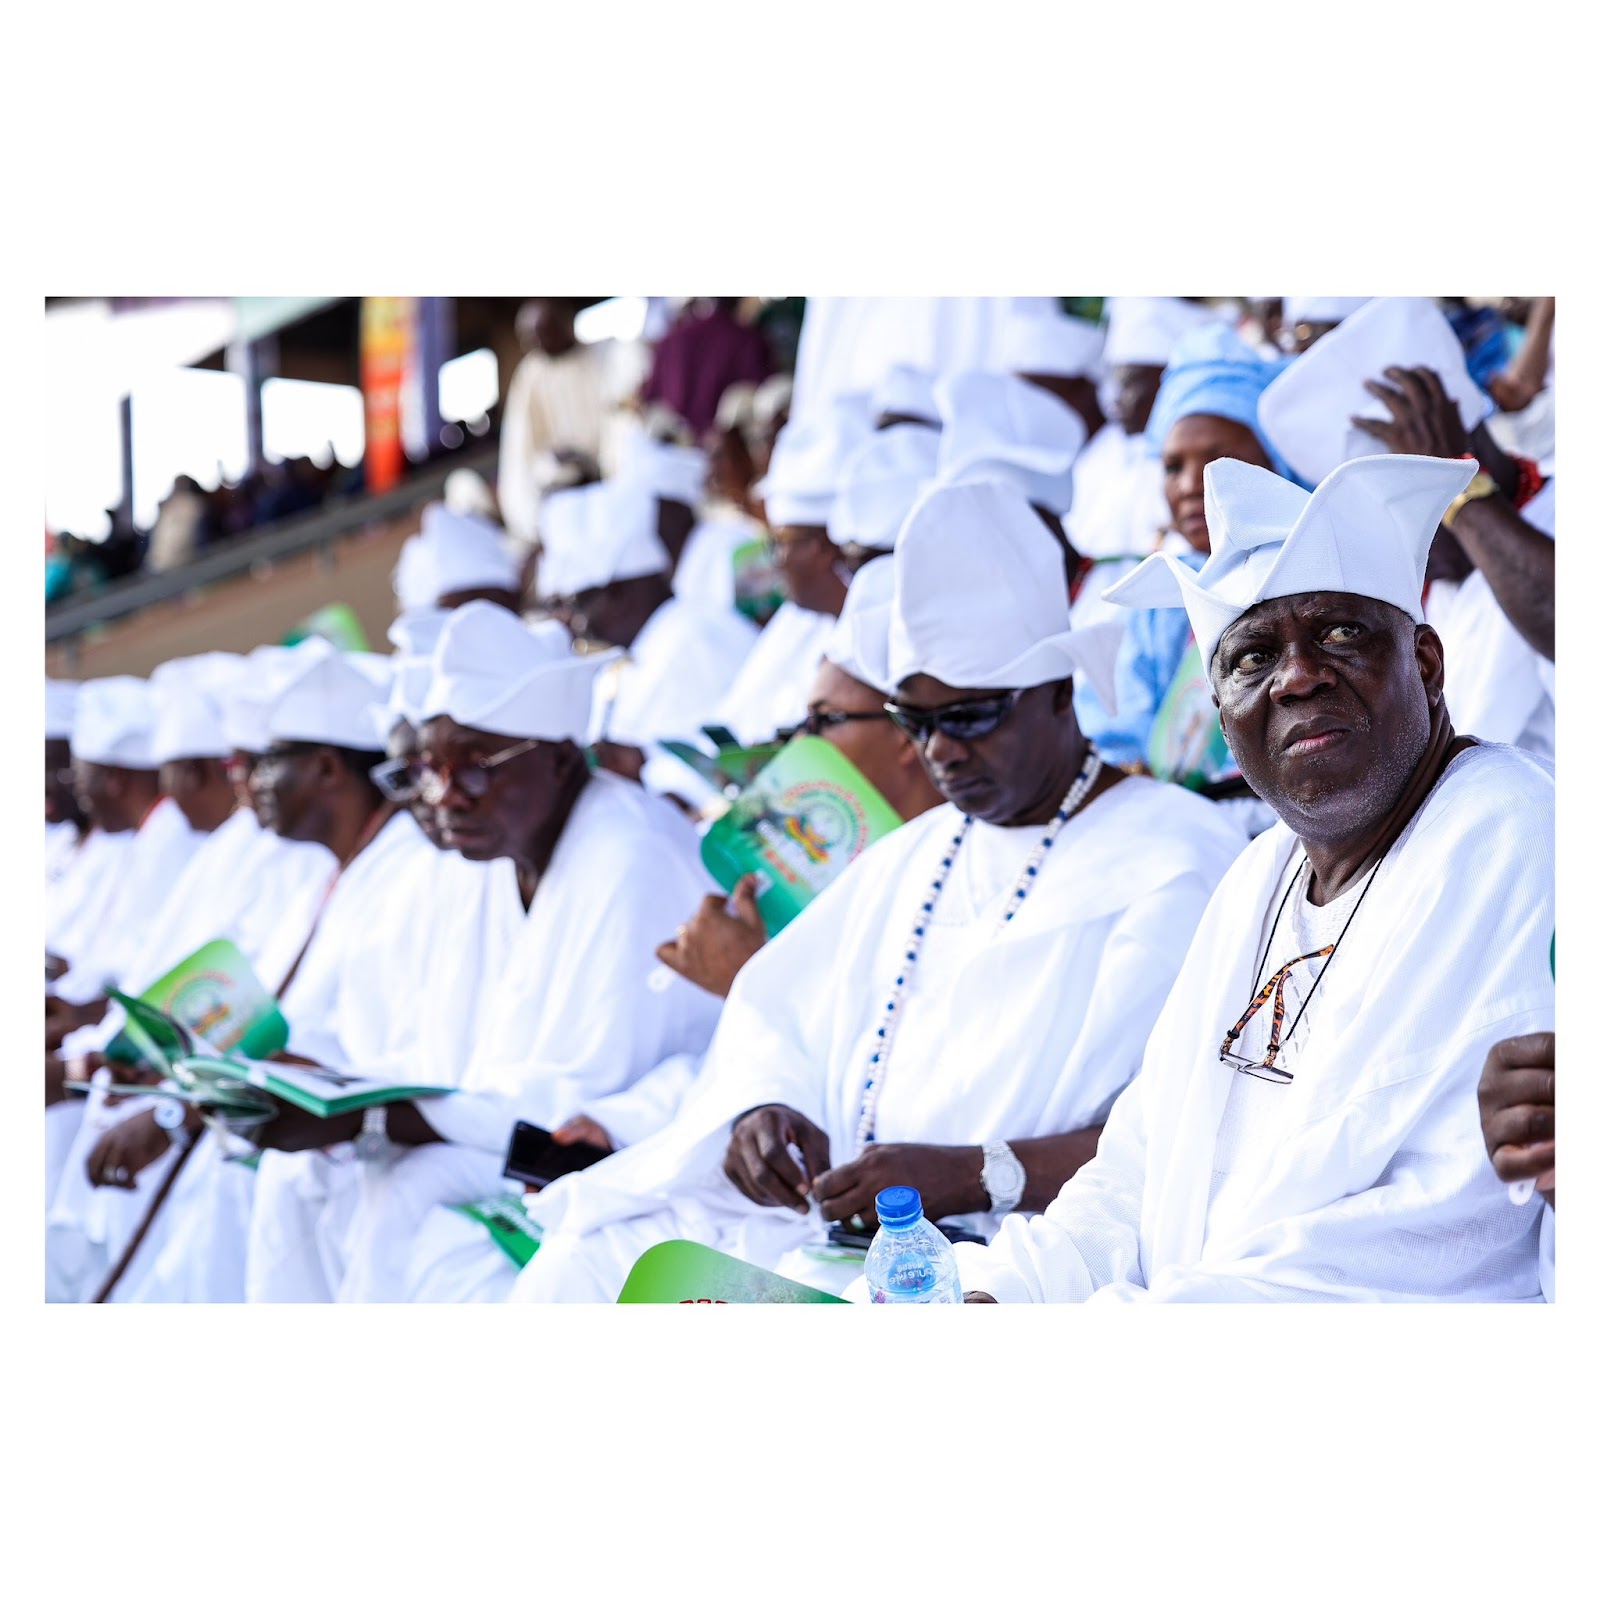 Ojude Oba: All You Need to Know About Ijebu’s Iconic Festival